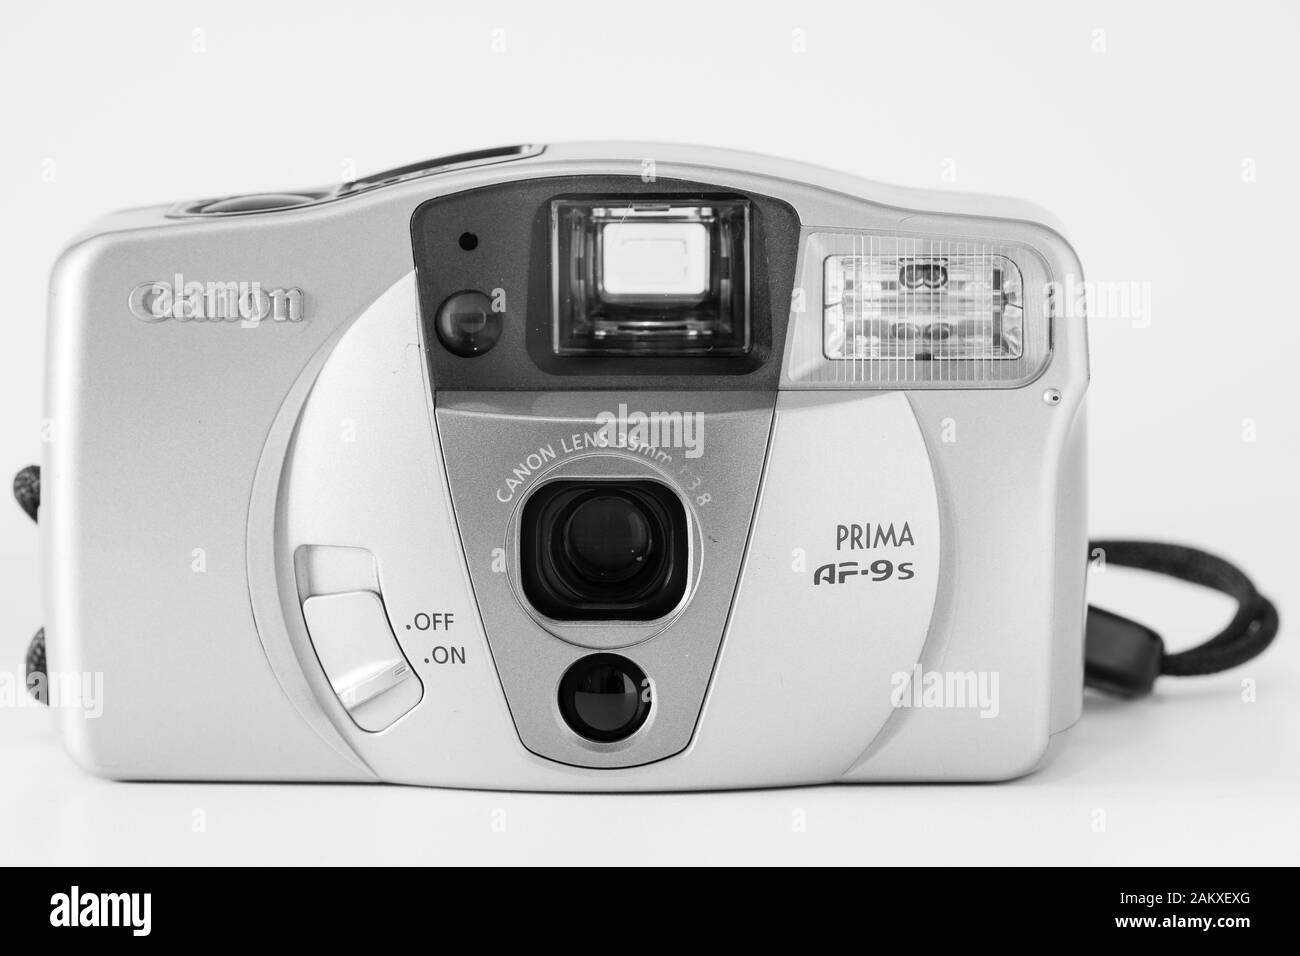 Front view of a compact analog camera, 35mm system, Canon brand, 'Af9 Prima' model, monochrome image. Stock Photo